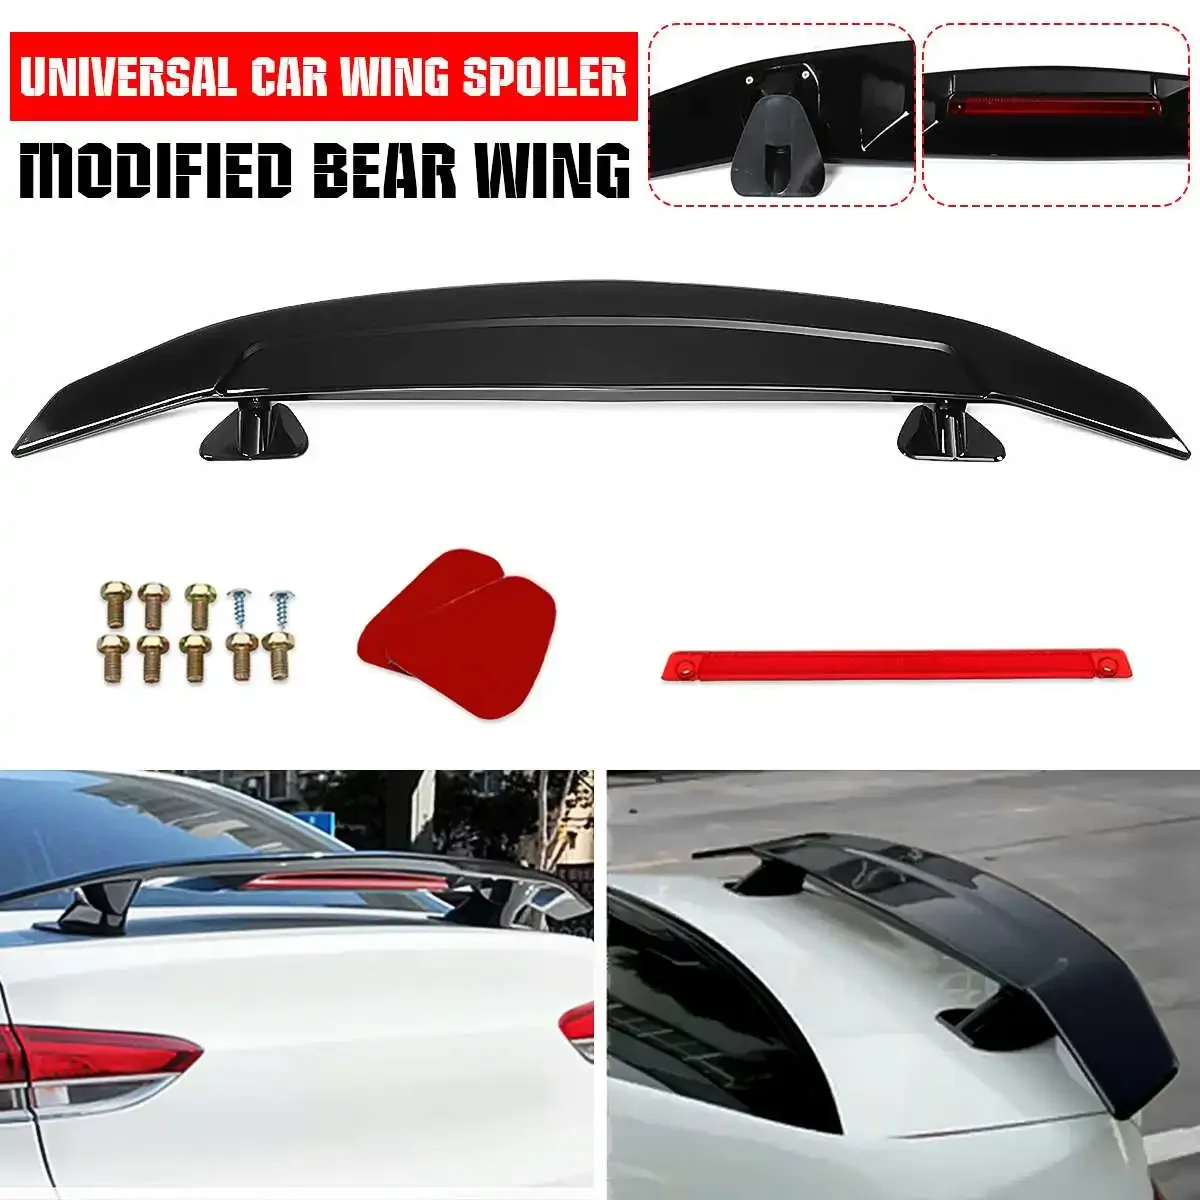 

Universal GT Racing Sport Rear Trunk Boot Lid Spoiler Ducktail Lip Wing For Mostly Sedan Car For Nissan GTR For Mustang Body Kit